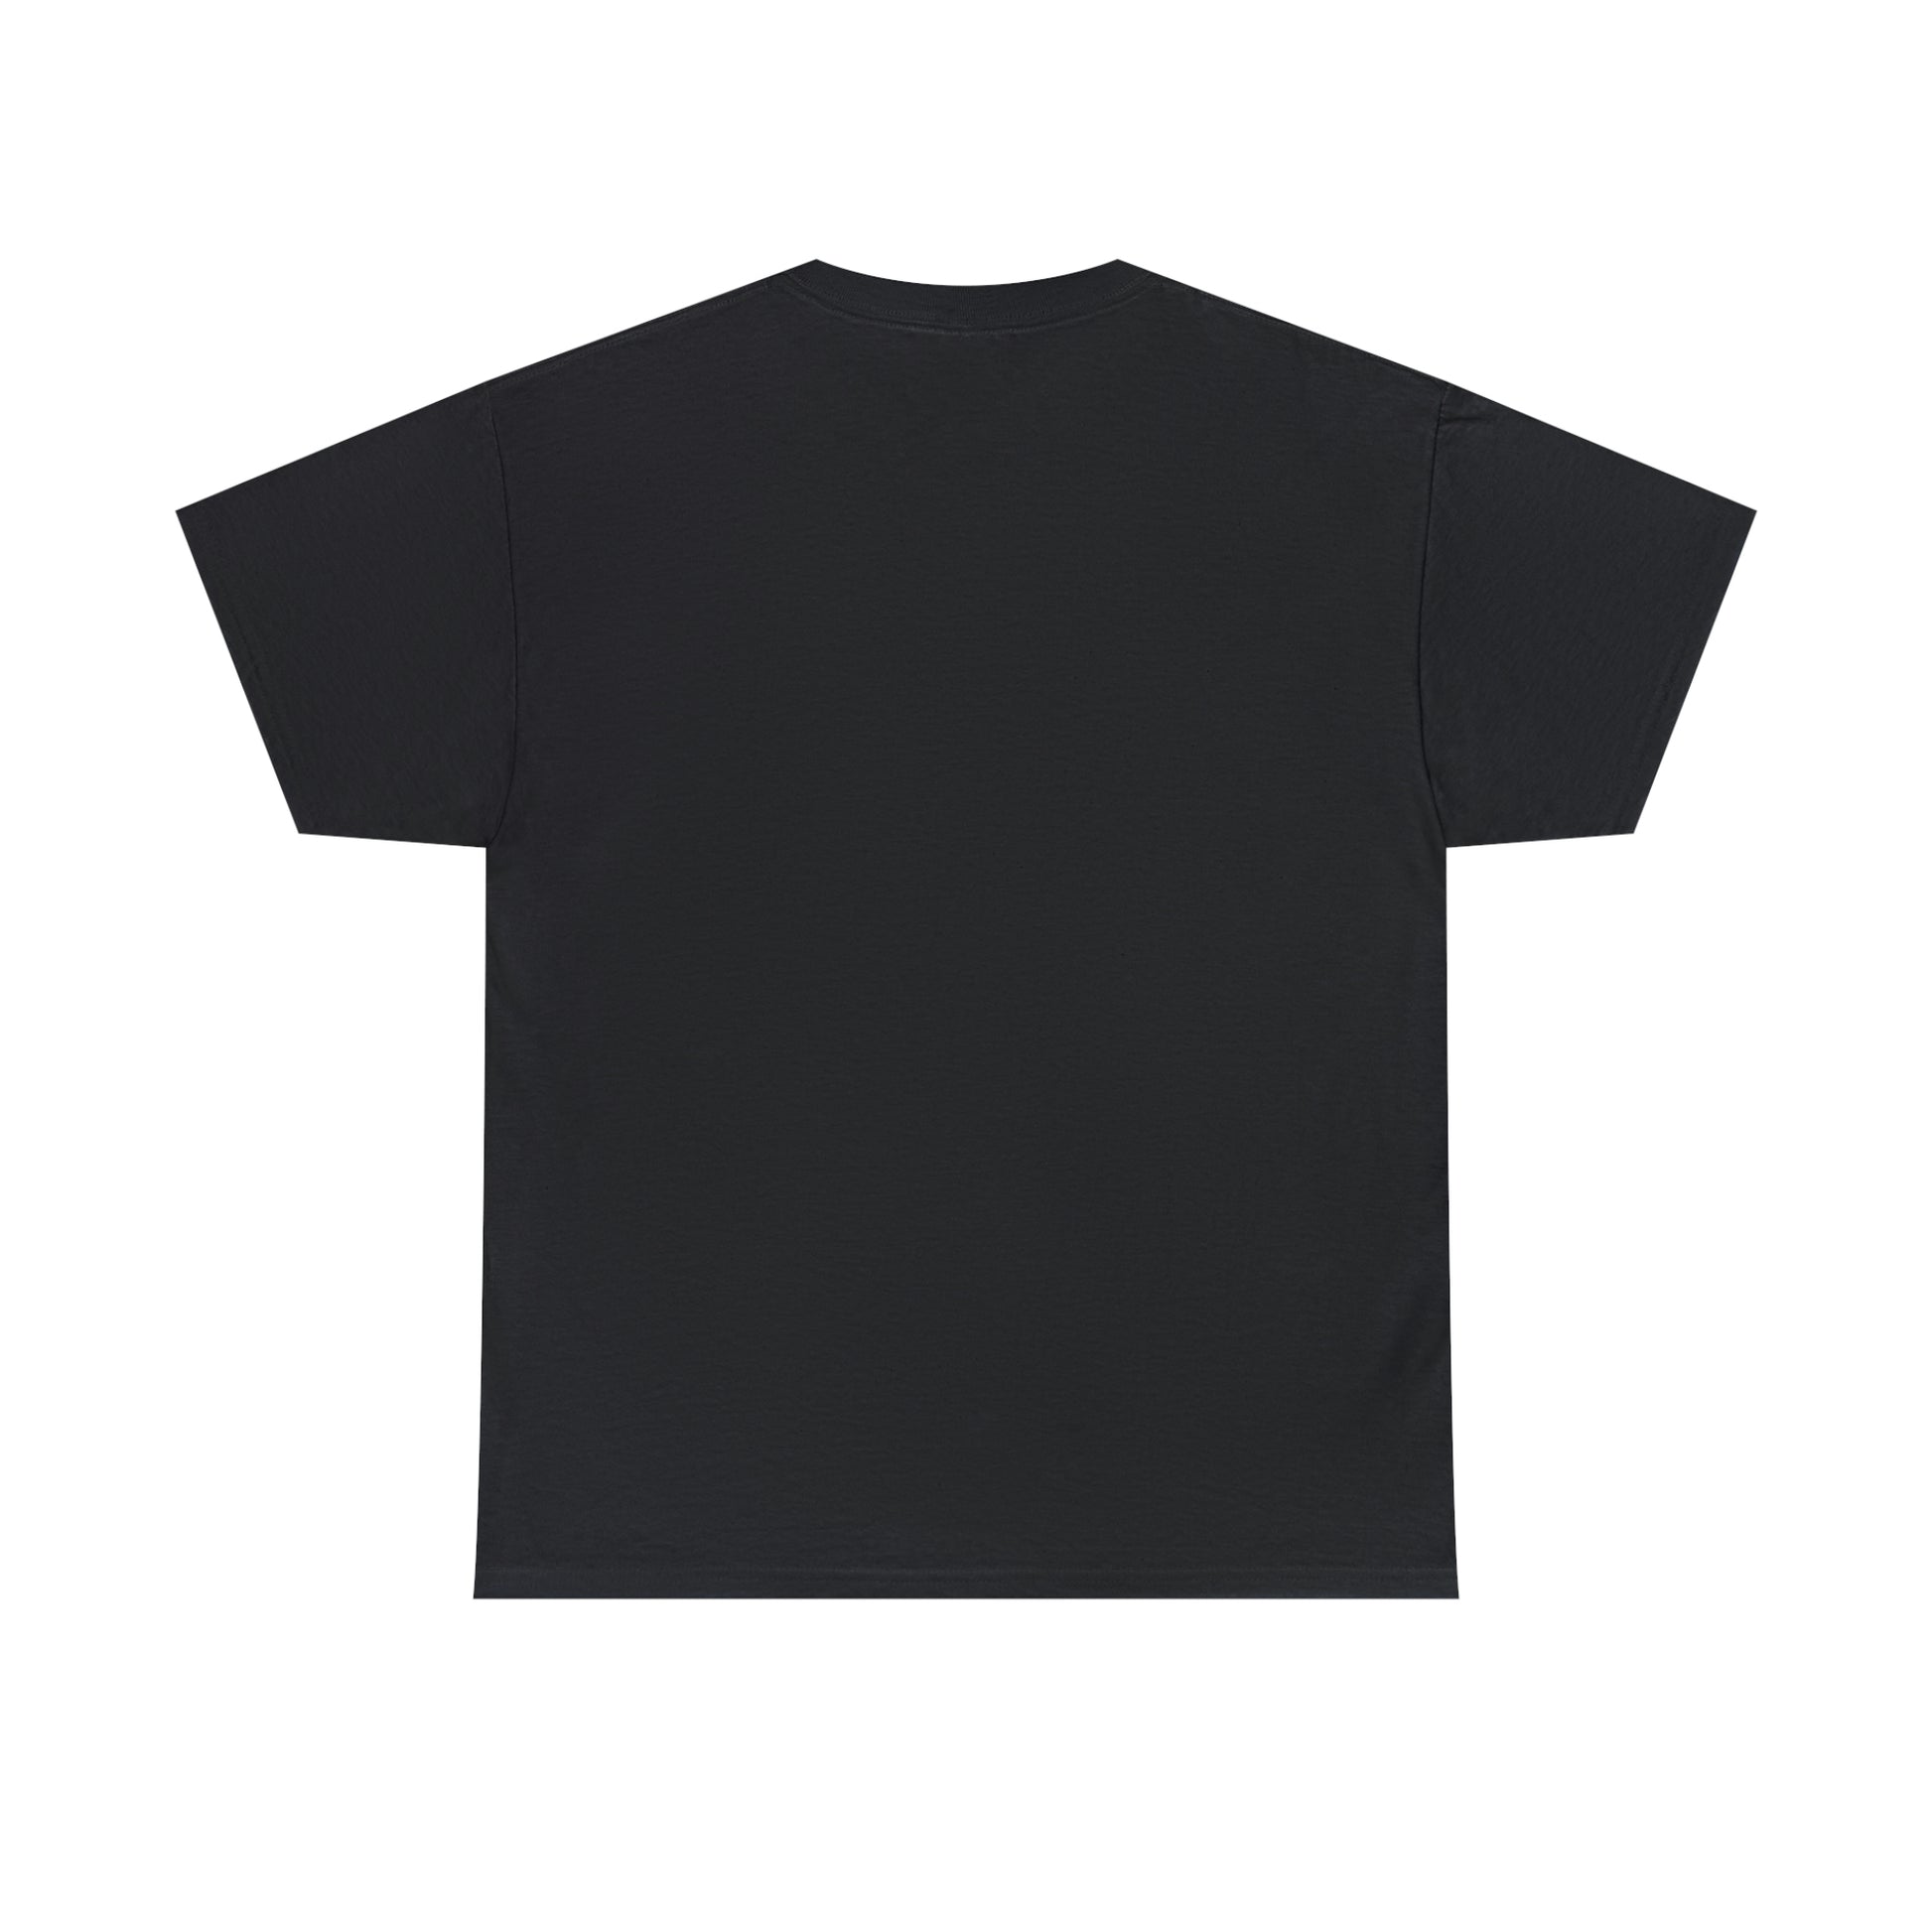 Flat back view of the Black T-shirt